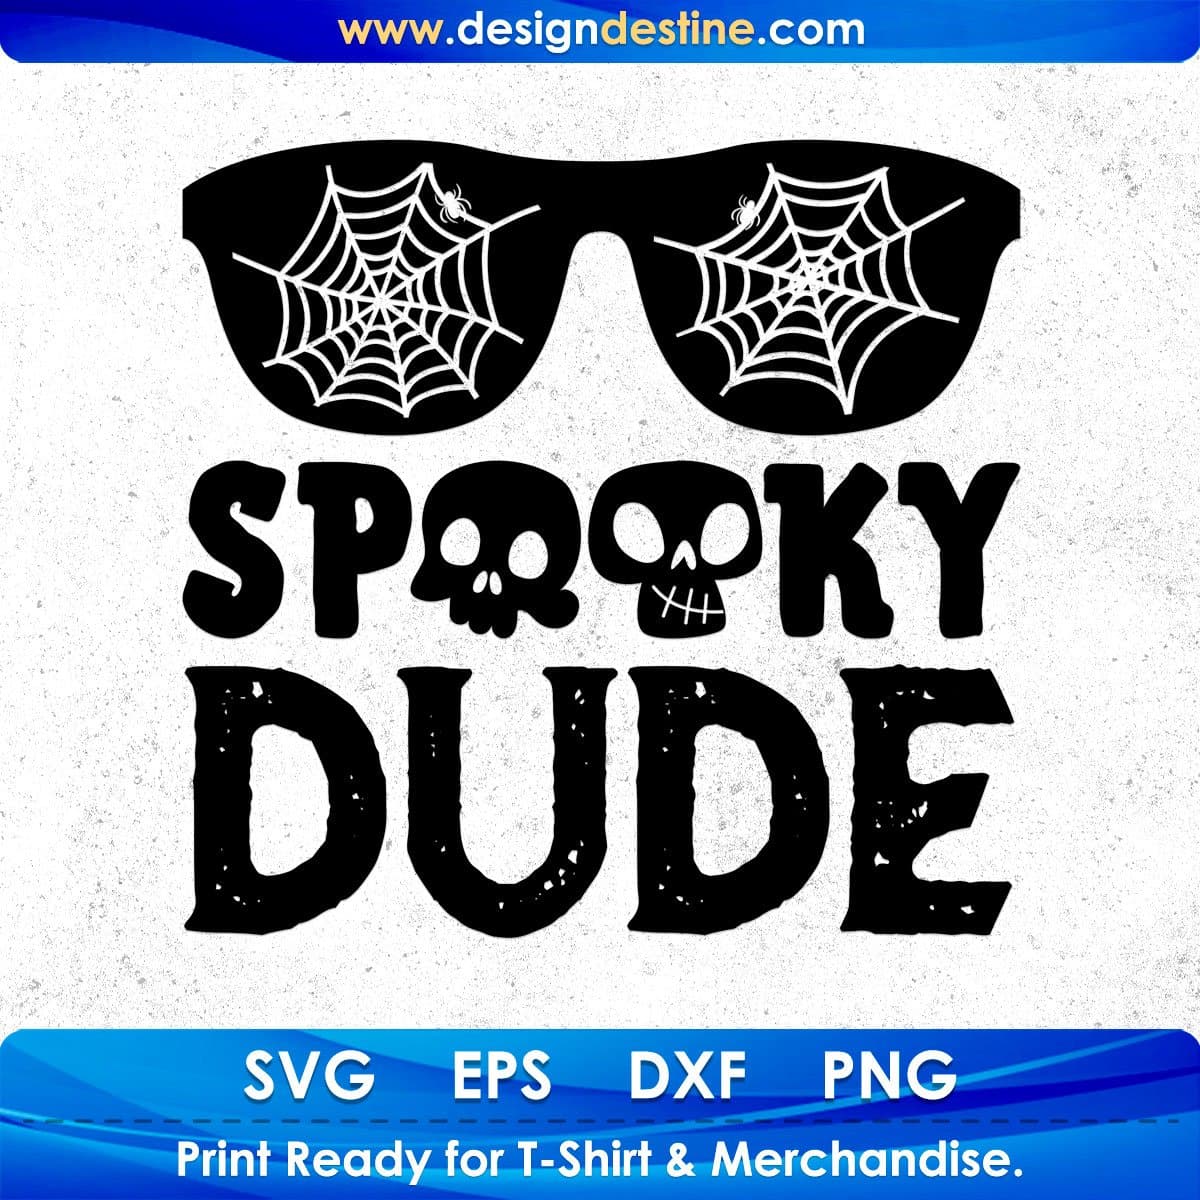 Spooky Dude Ghost Spider Halloween T shirt Design In Png Svg Cutting Printable Files